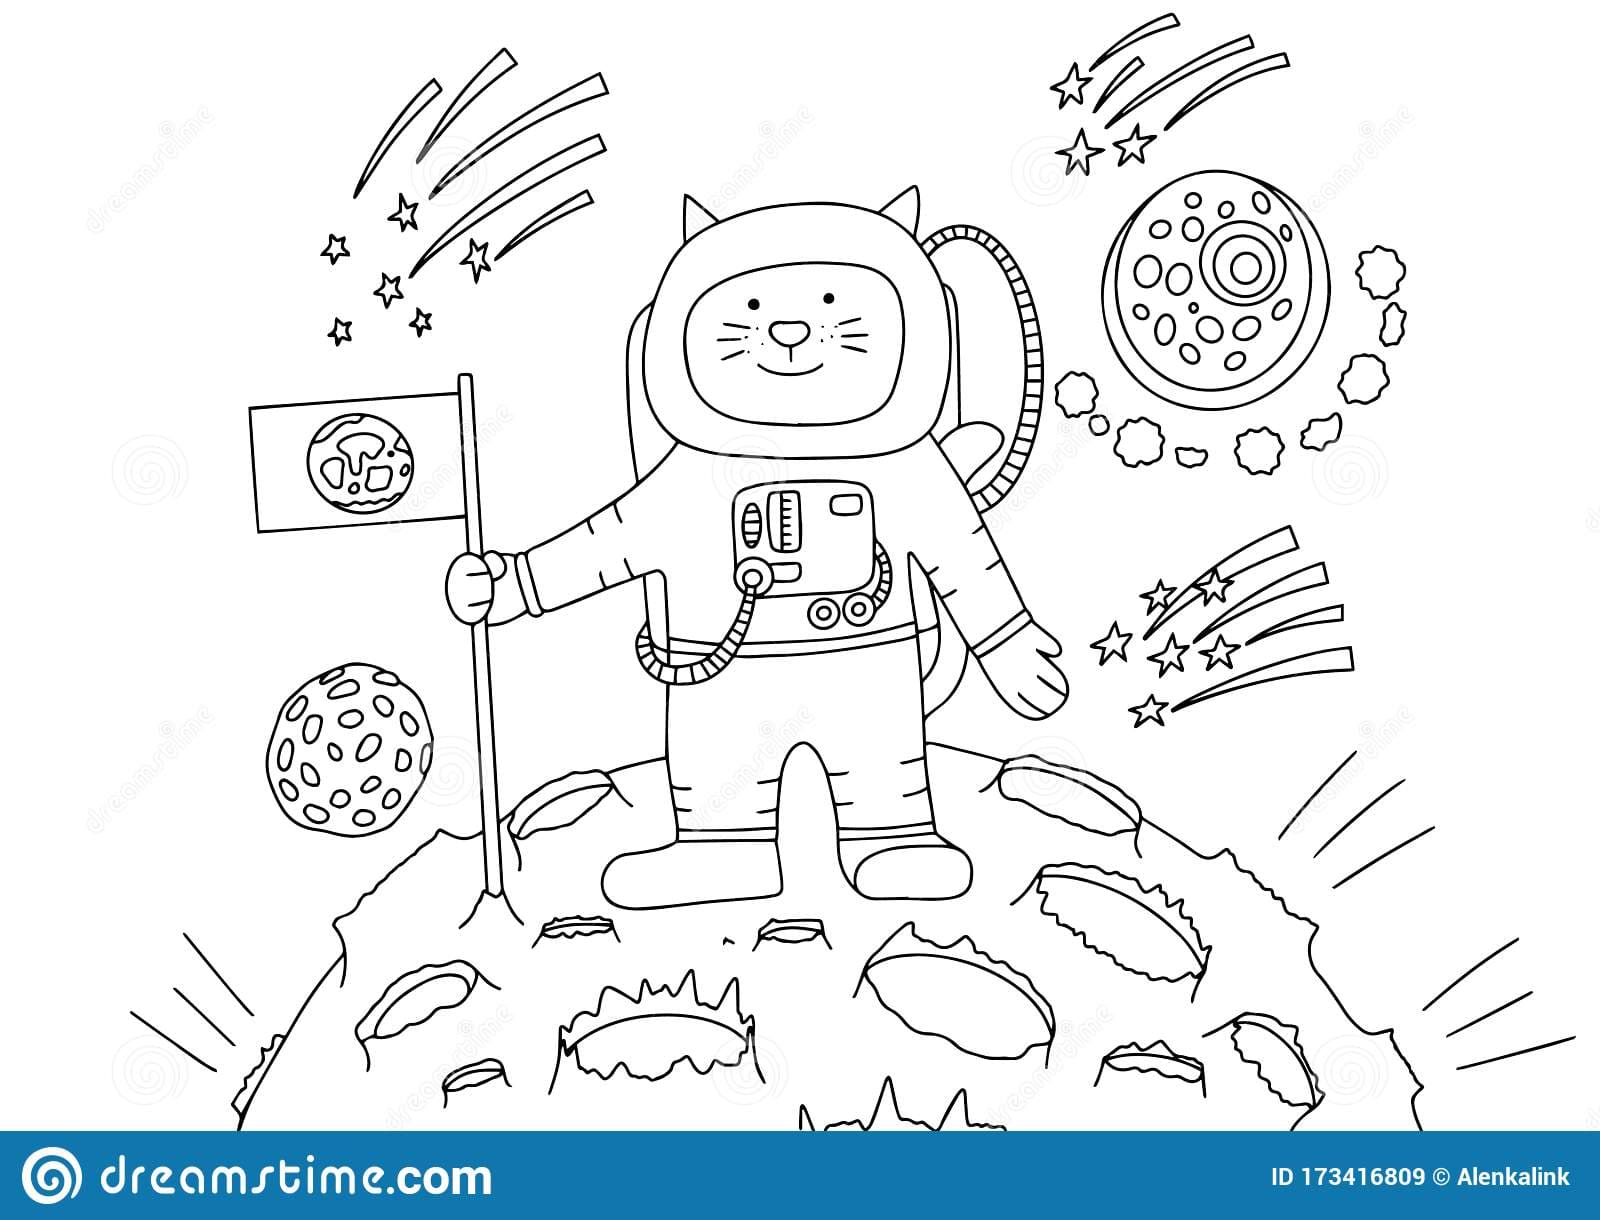 Coloring book with astronaut cat